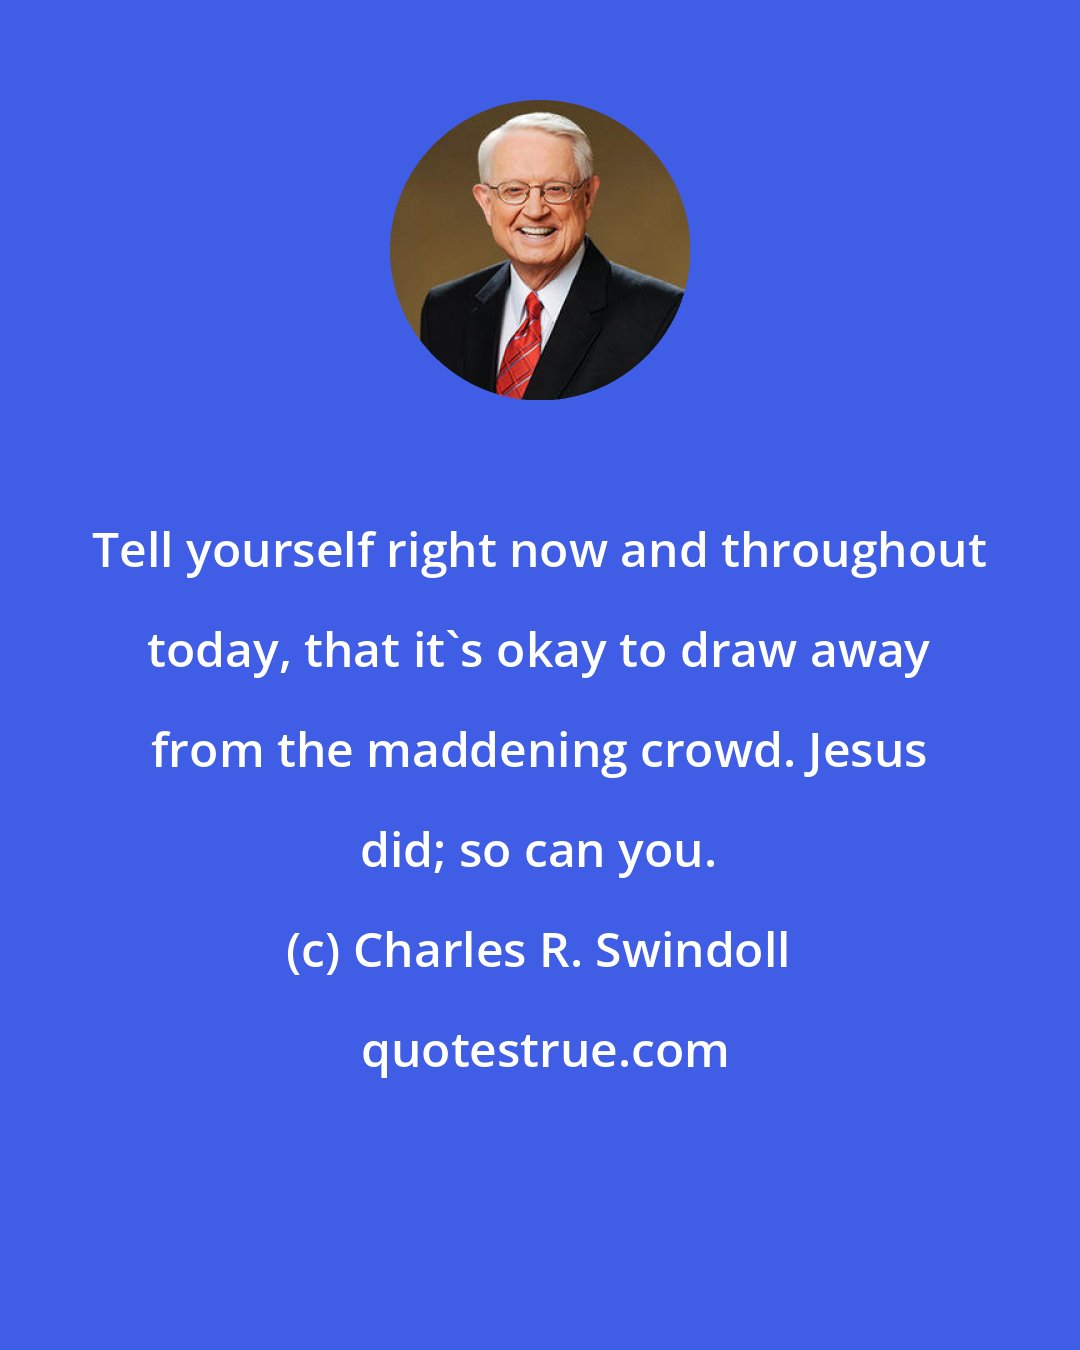 Charles R. Swindoll: Tell yourself right now and throughout today, that it's okay to draw away from the maddening crowd. Jesus did; so can you.